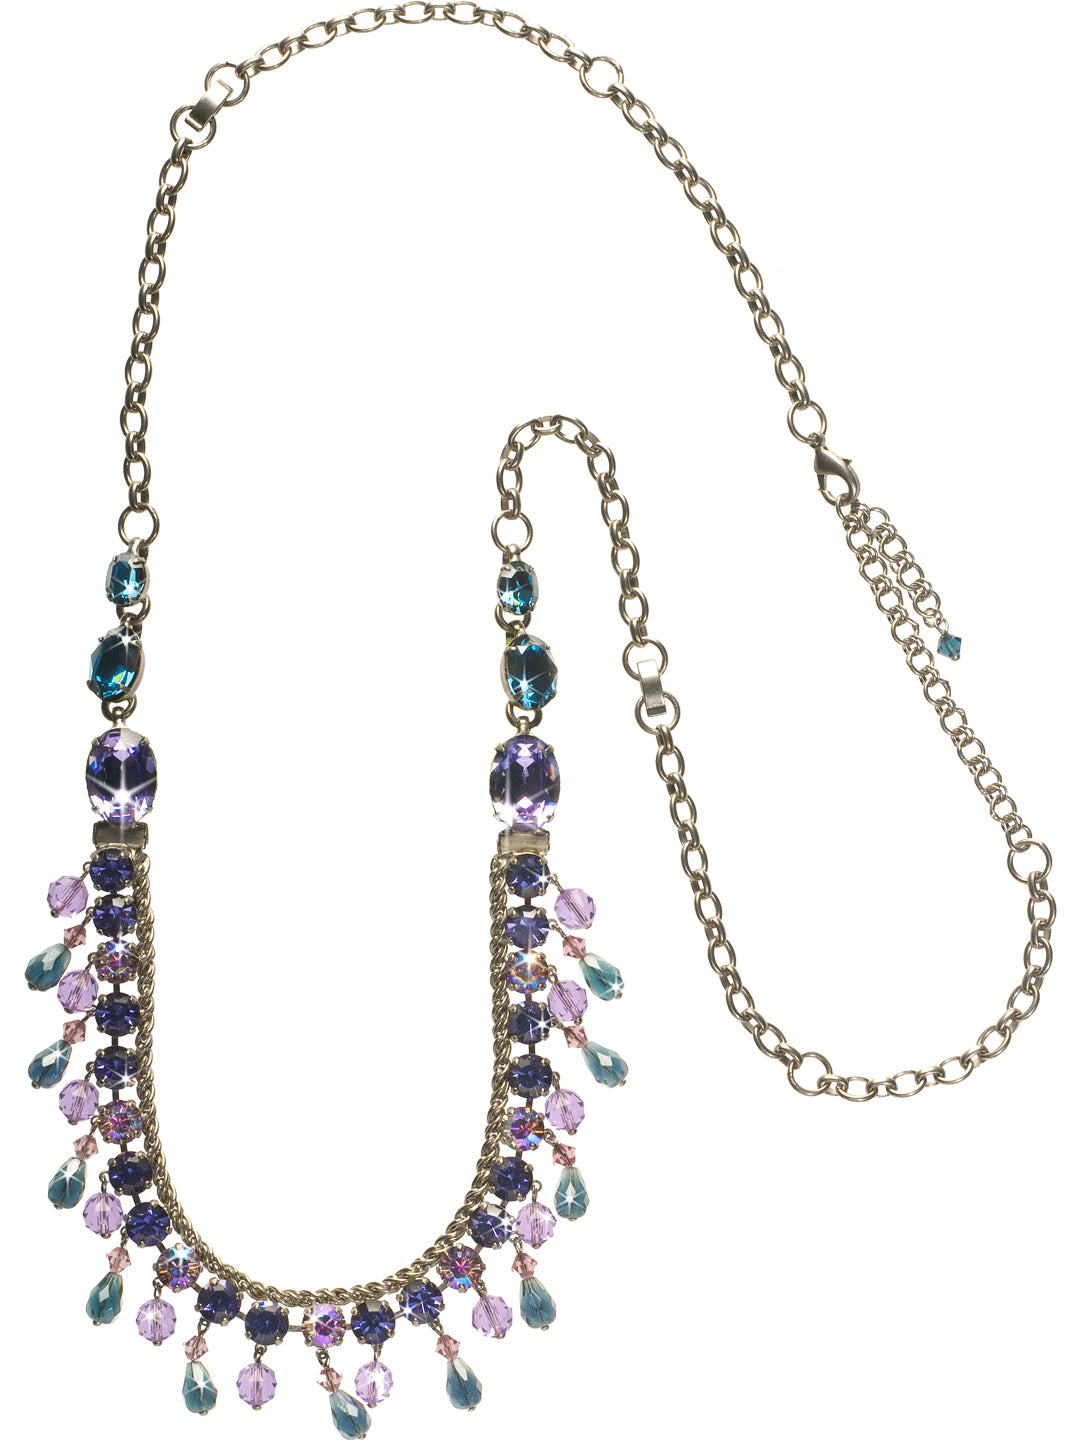 Never Too Much Shine Necklace - NCM3ASHY - Like having two necklaces in one! This unique necklace is convertible so that you can style it short or wear it as a long strand. Featuring gorgeous cut crystals tastefully hung on a metallic rope chain, this piece will be your new style staple. From Sorrelli's Hydrangea collection in our Antique Silver-tone finish.